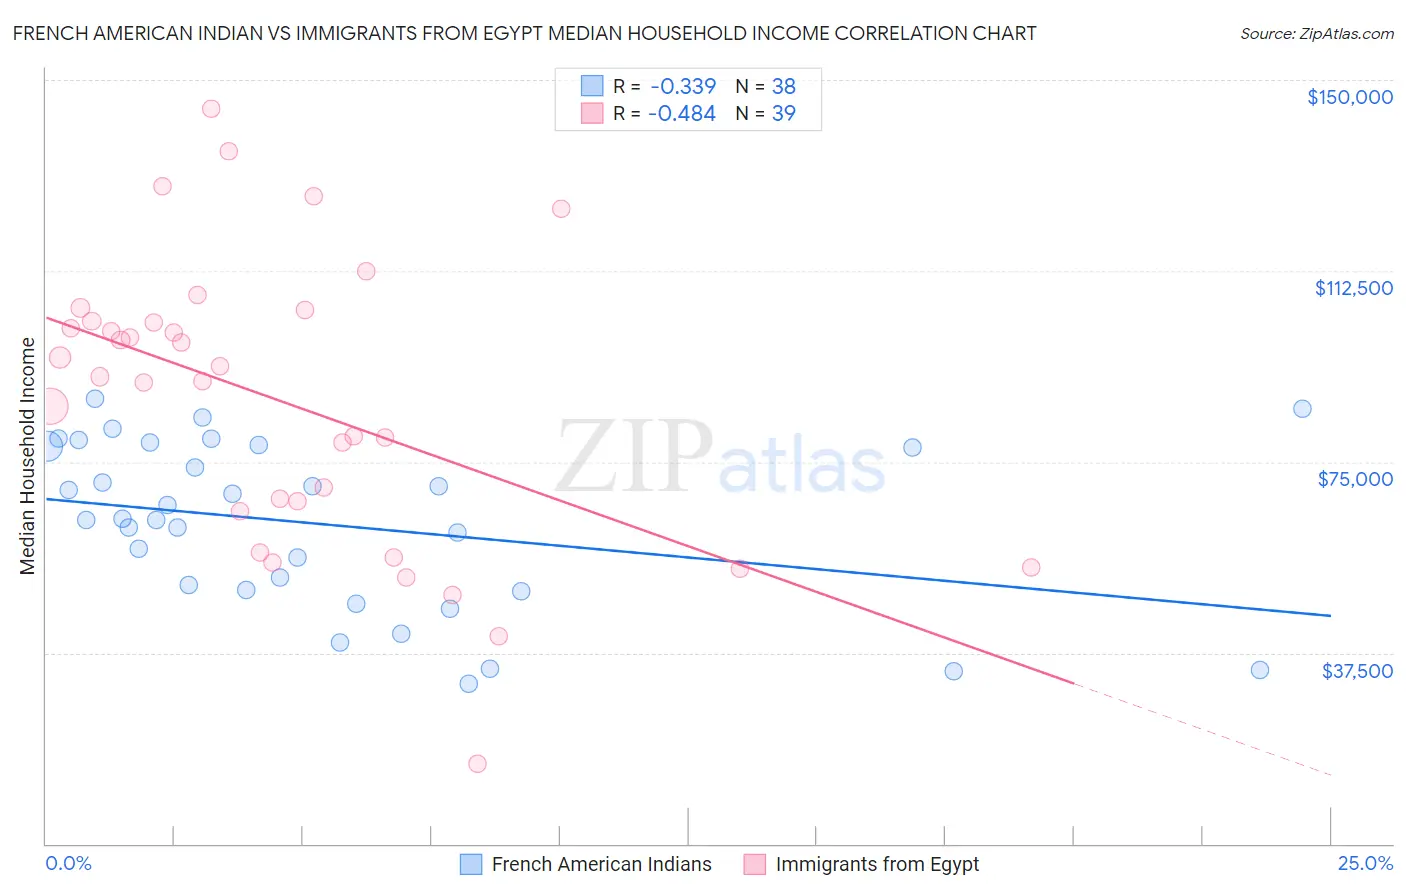 French American Indian vs Immigrants from Egypt Median Household Income